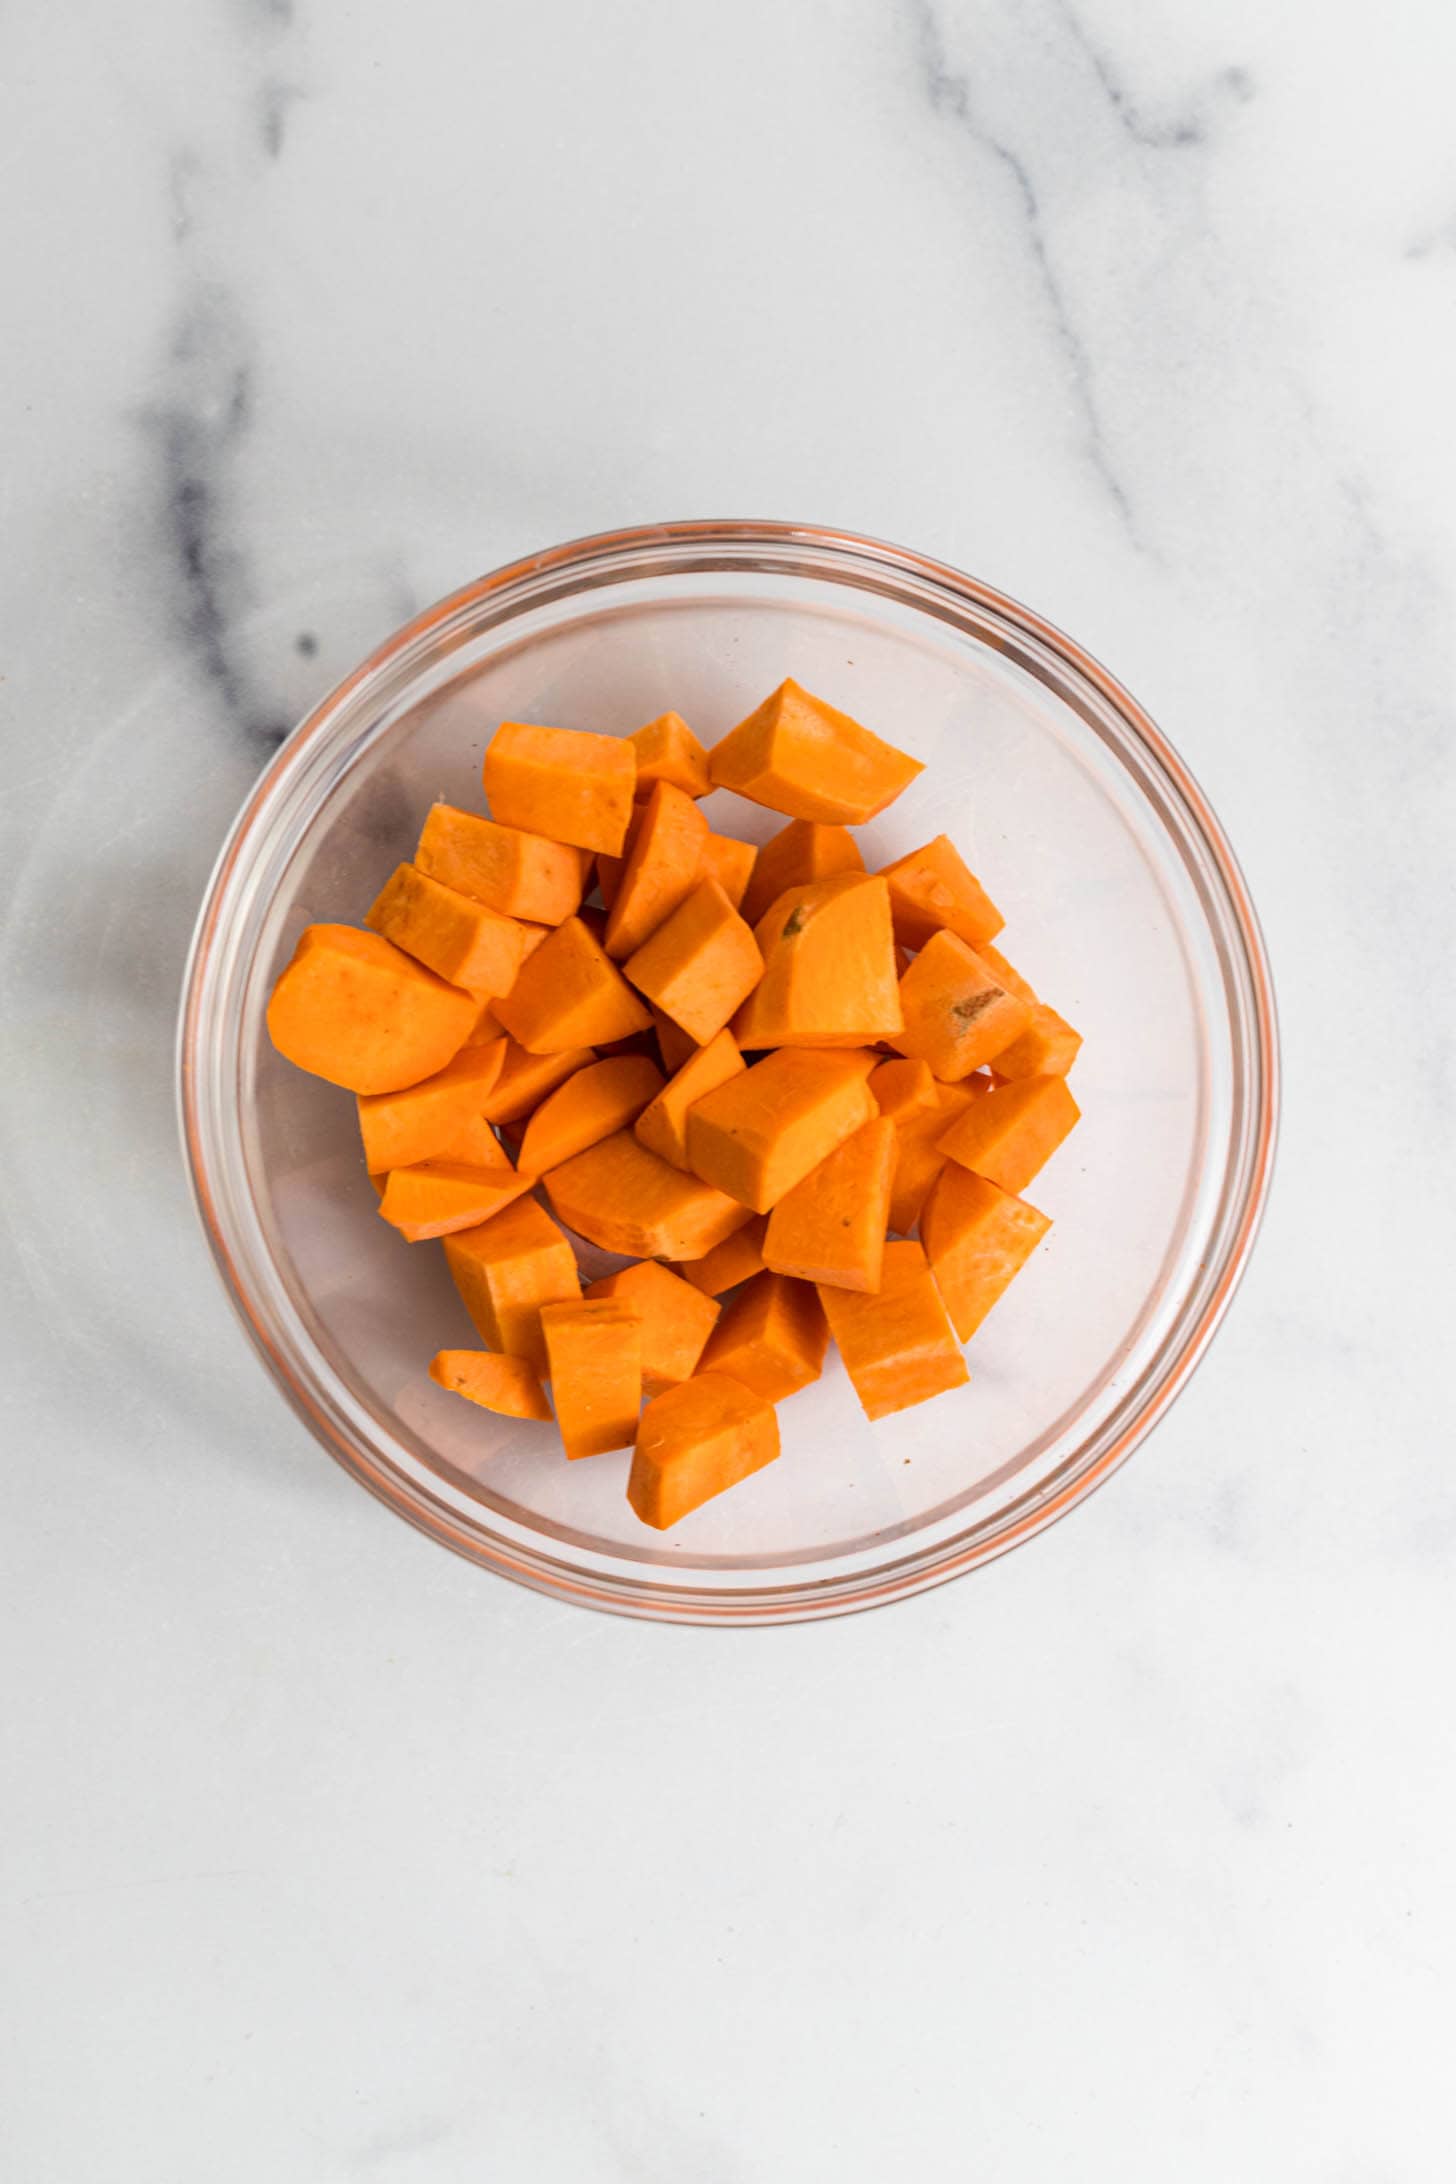 A bowl of cooked sweet potato diced.